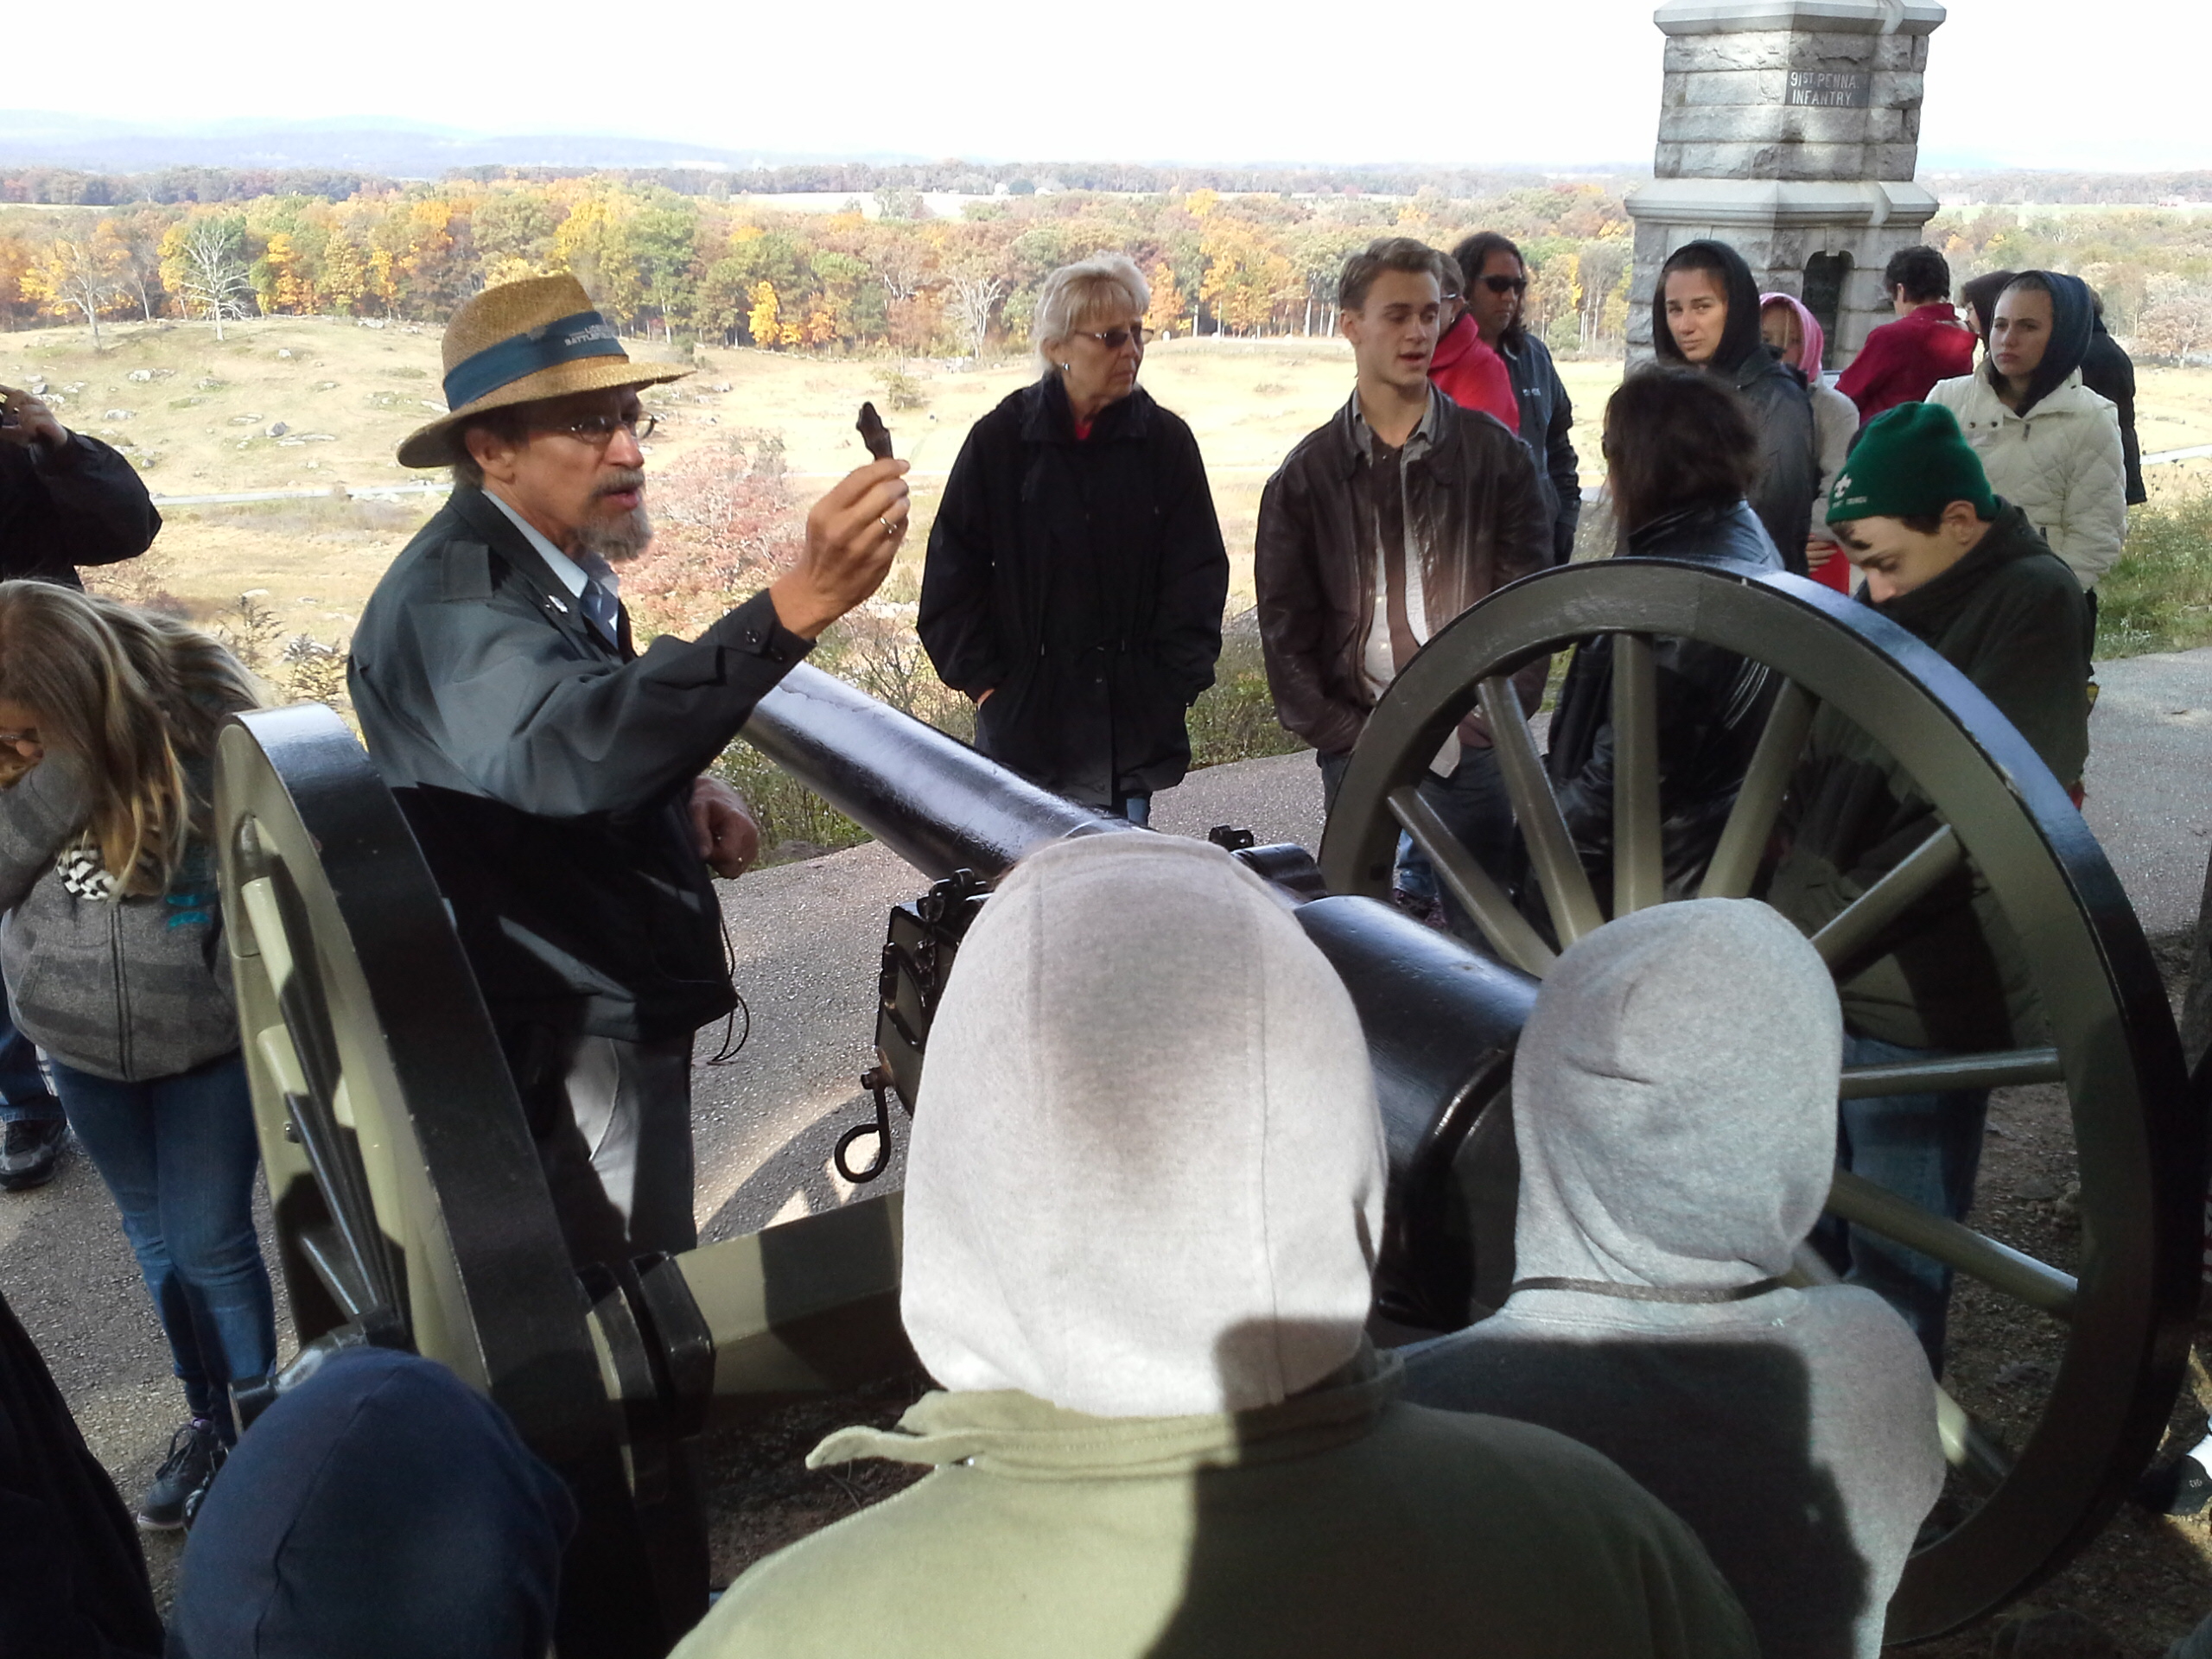 Middle school students standing around a civil war canon listing to an educational tour guide - 14 little round top